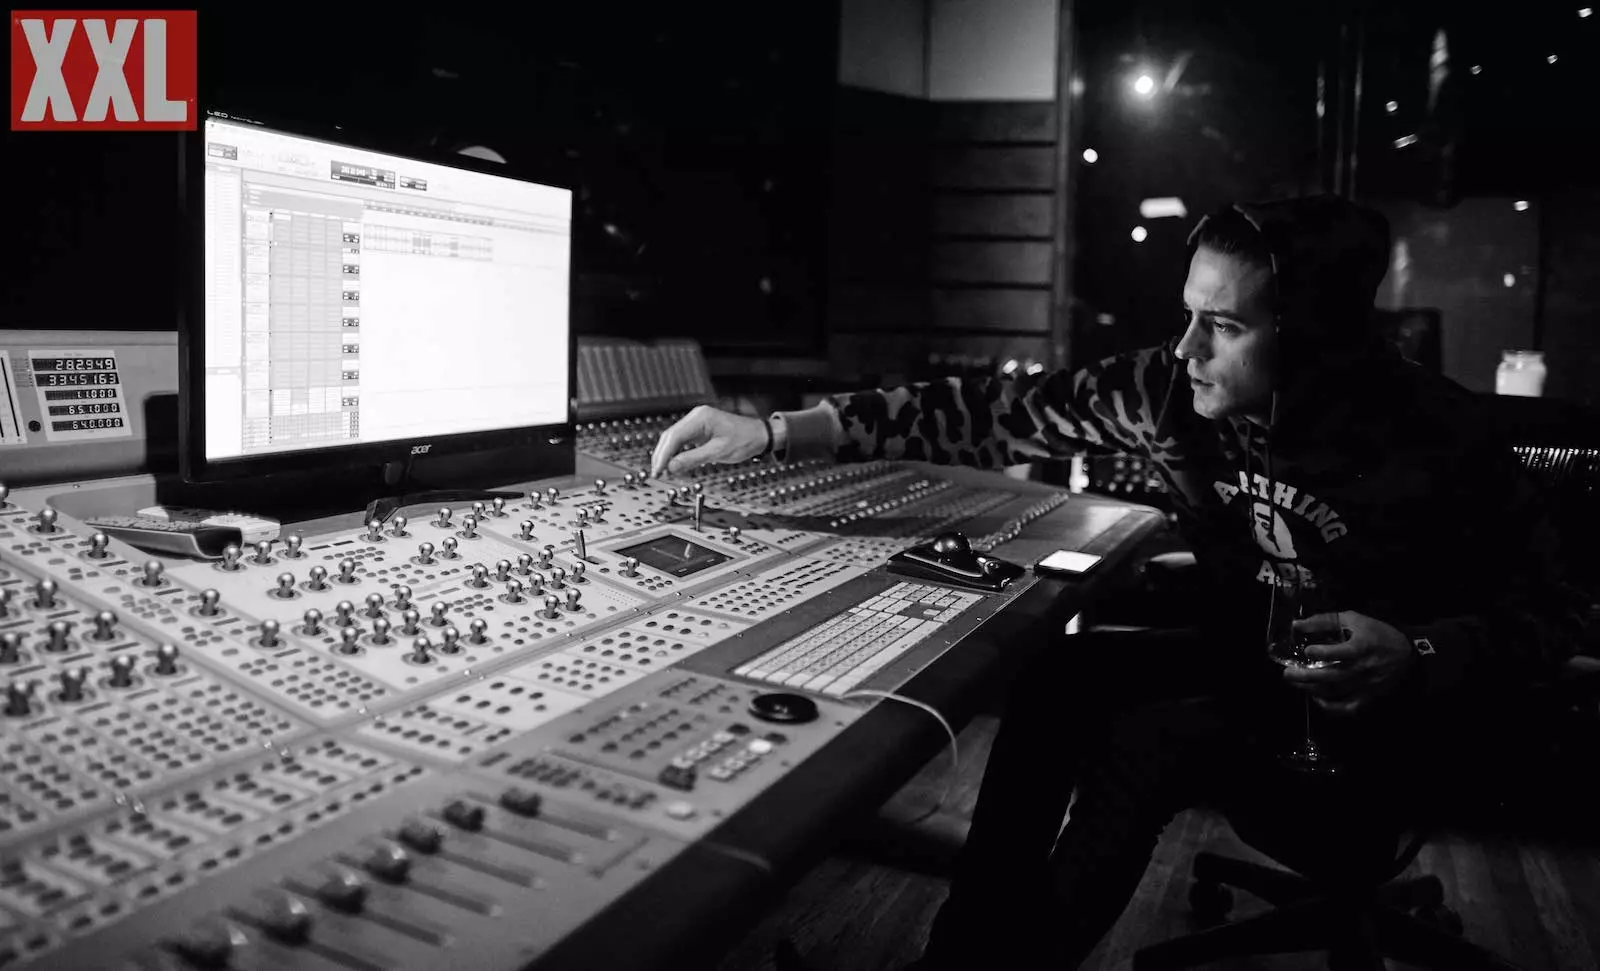 G-Eazy Is Finding His Own Sound on His Next Album - XXL